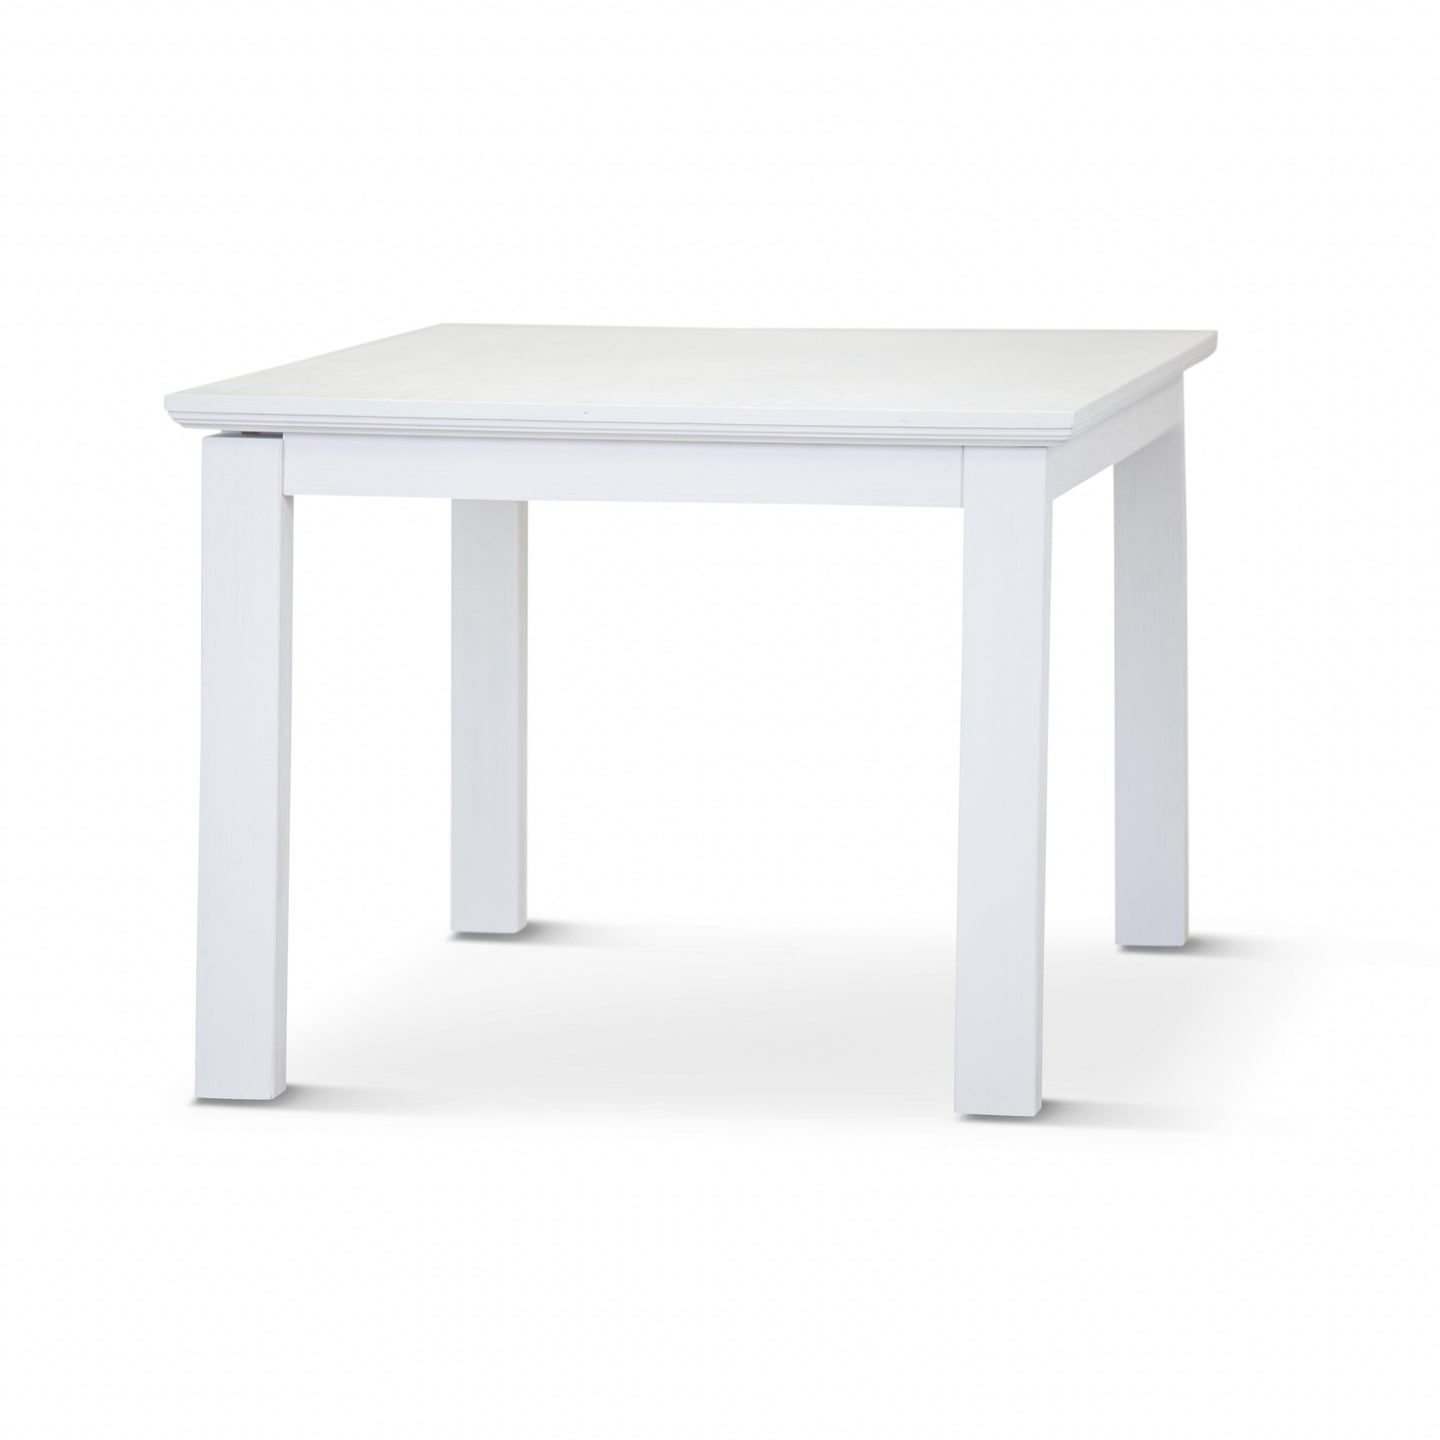 Buy Laelia Dining Table 220cm Solid Acacia Timber Wood Coastal Furniture - White discounted | Products On Sale Australia